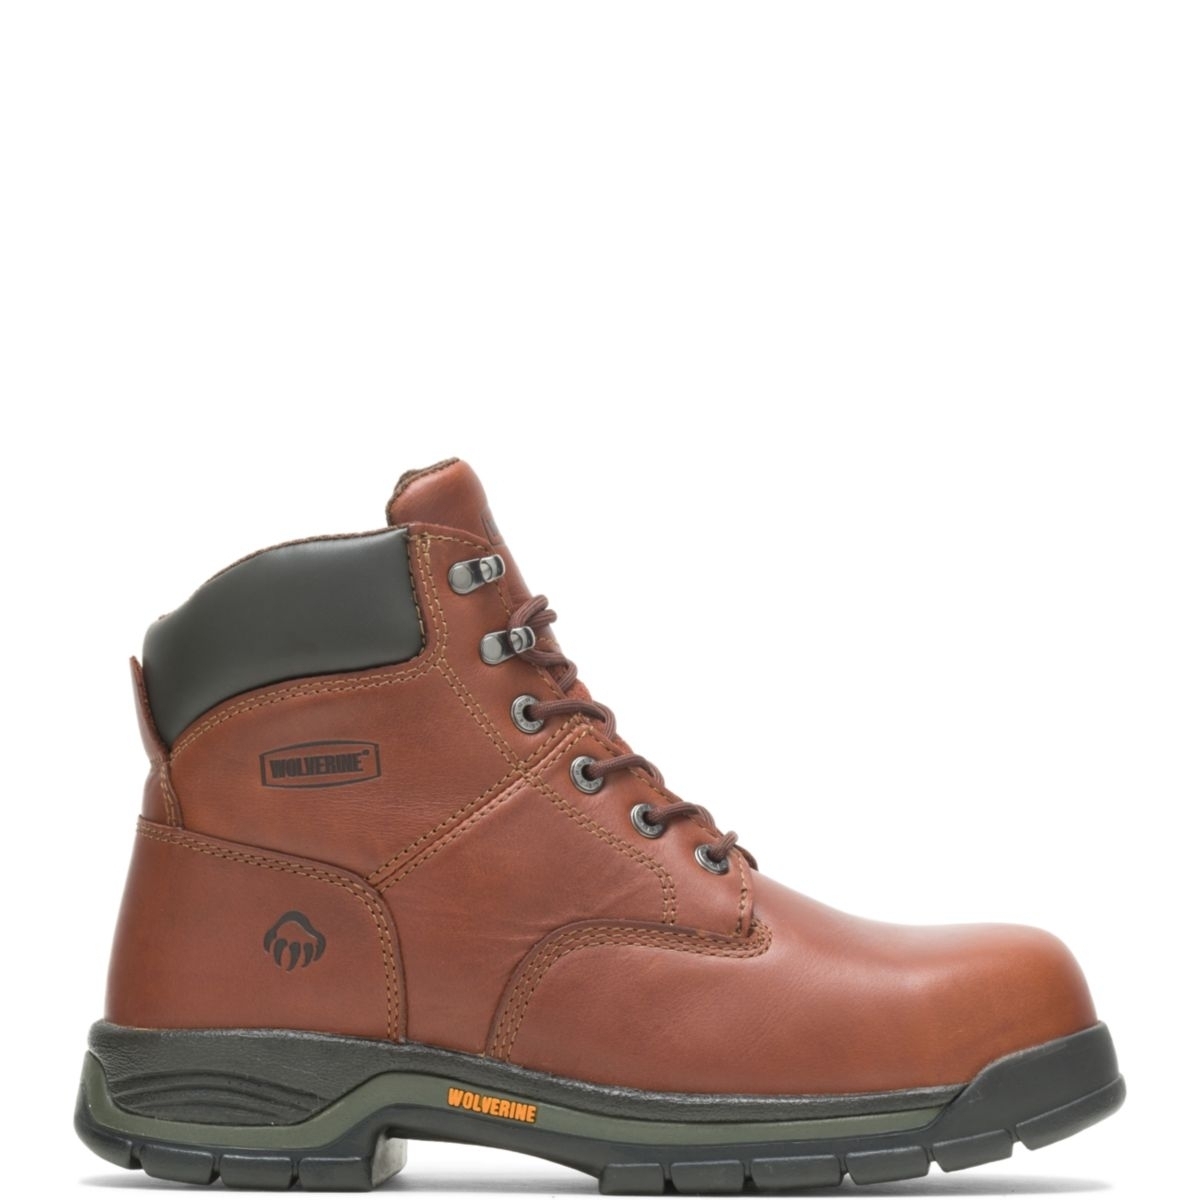 WOLVERINE Men's Harrison 6 Lace-Up SoftToe Work Boot Brown - W04906 Varies BROWN - BROWN, 11